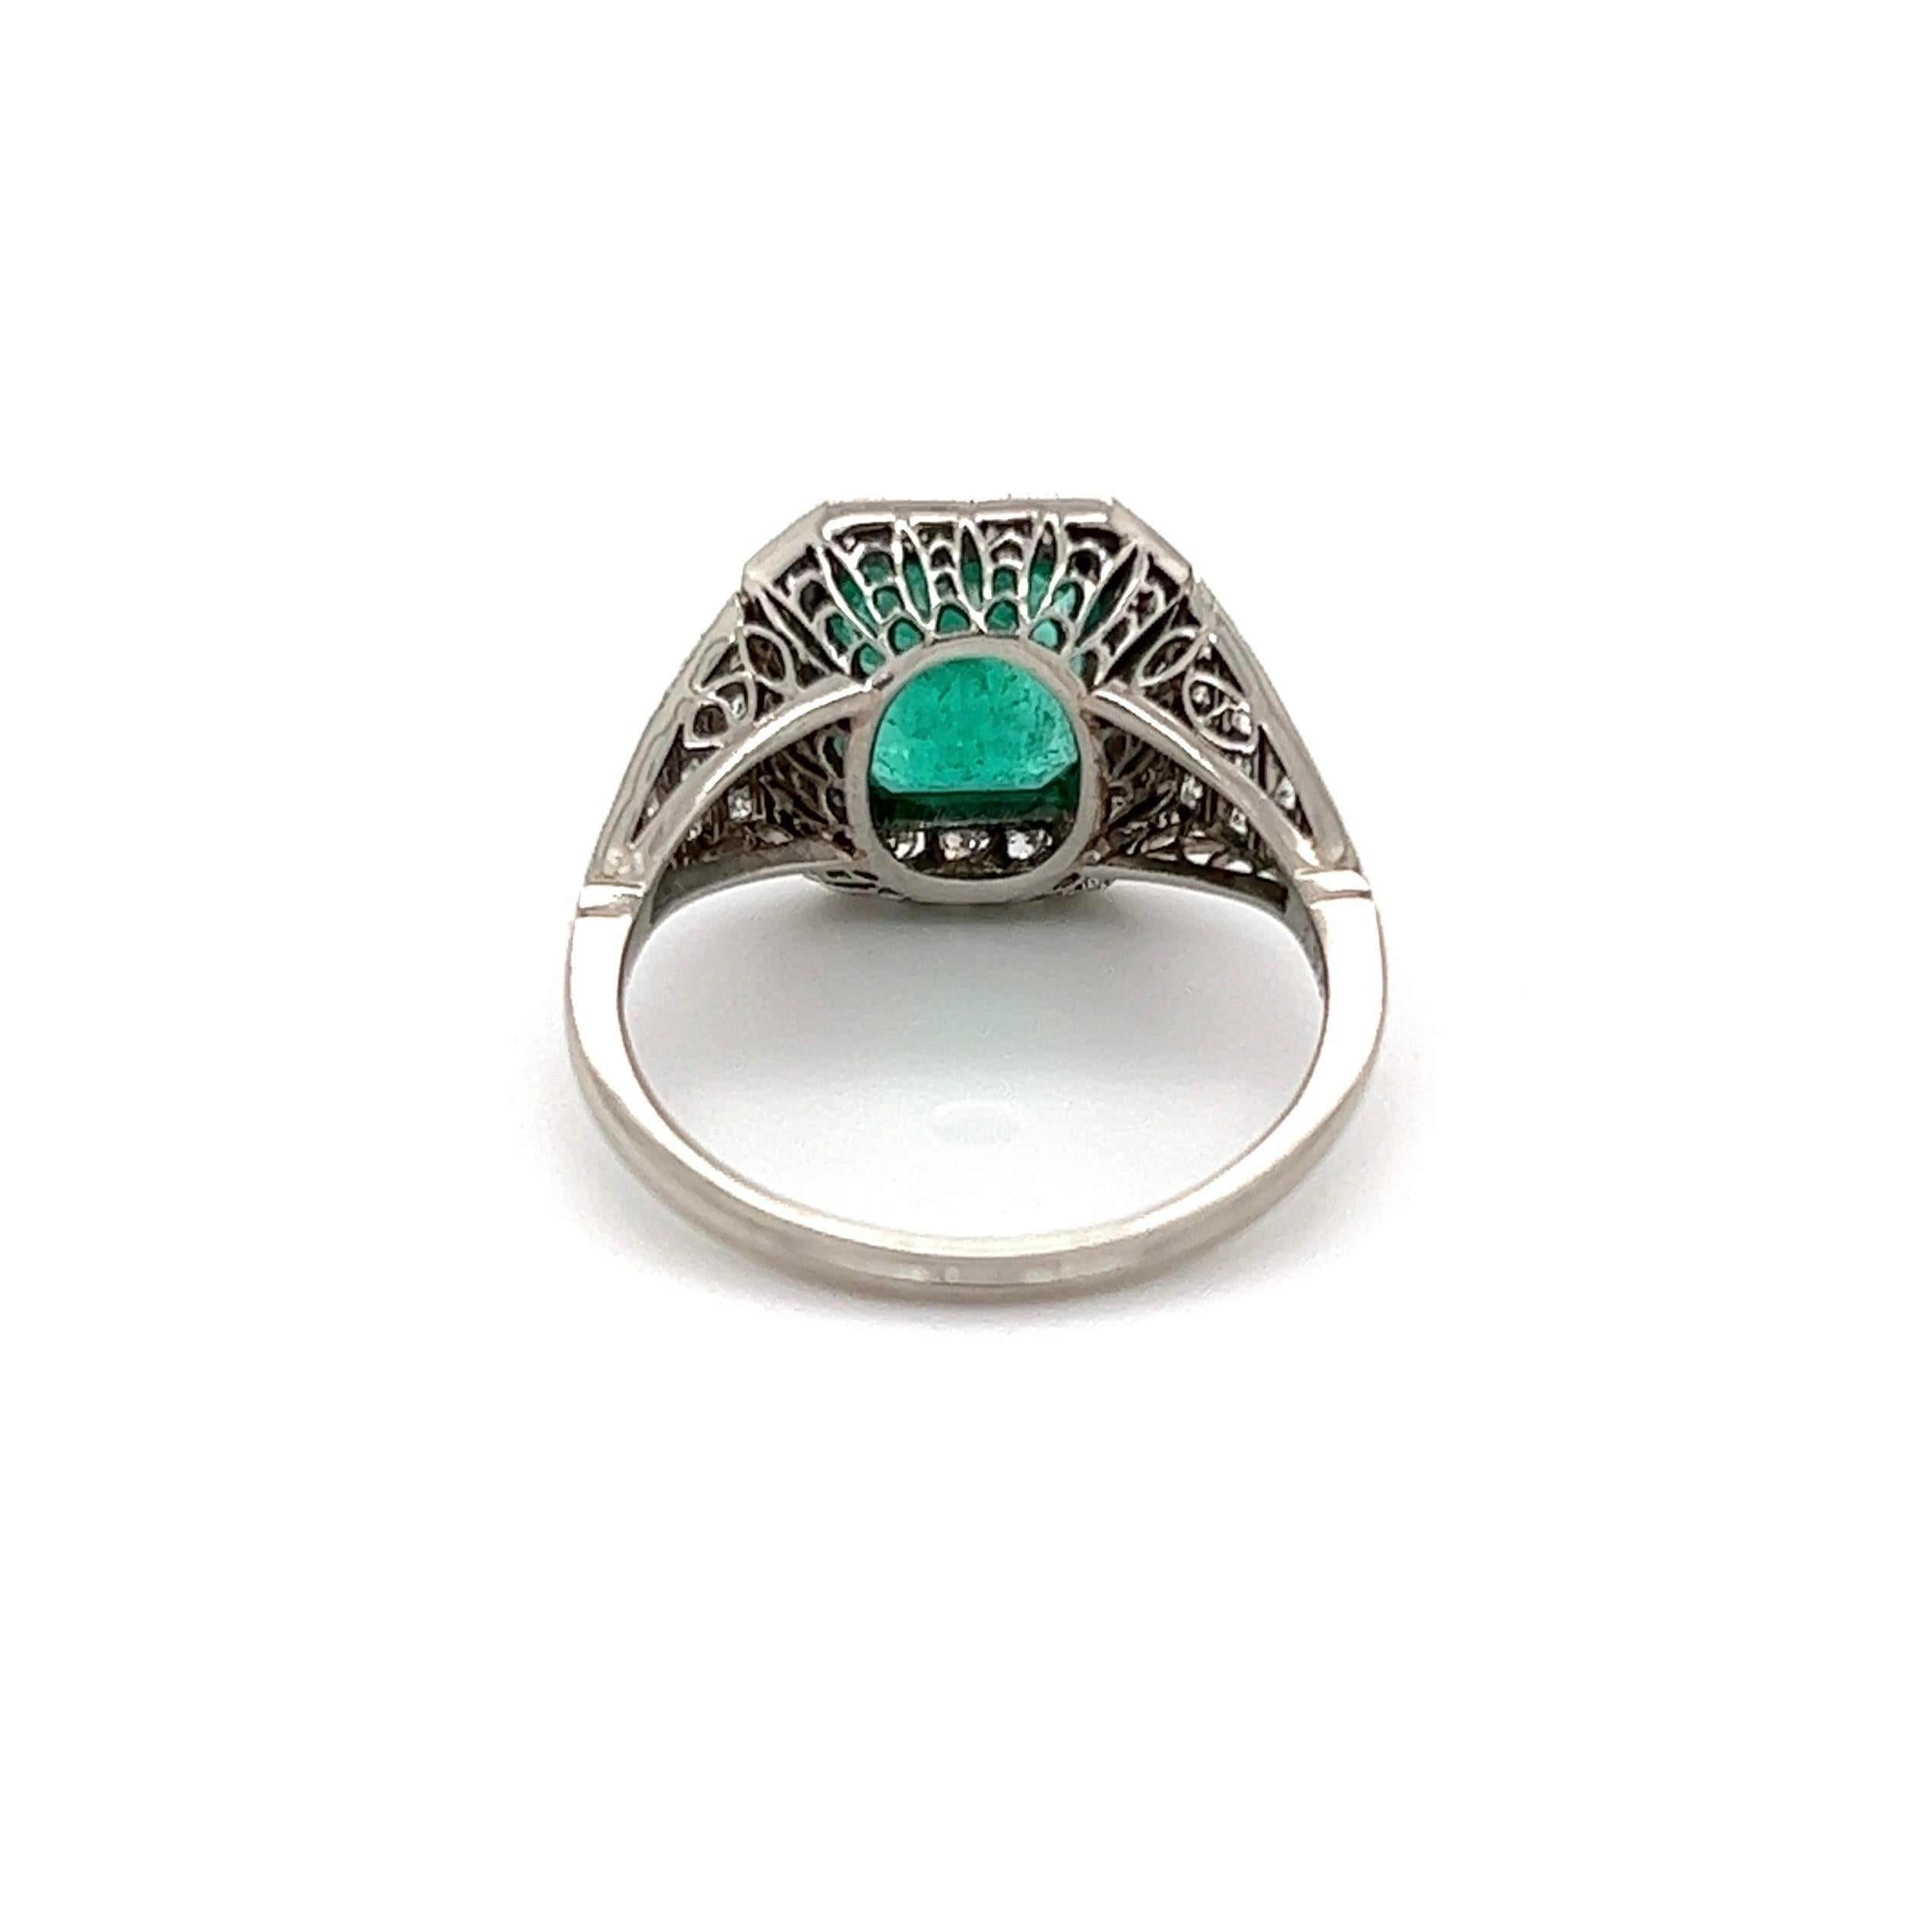 1.55 Carat Emerald and Diamond Platinum Cocktail Ring Fine Estate Jewelry In Excellent Condition For Sale In Montreal, QC